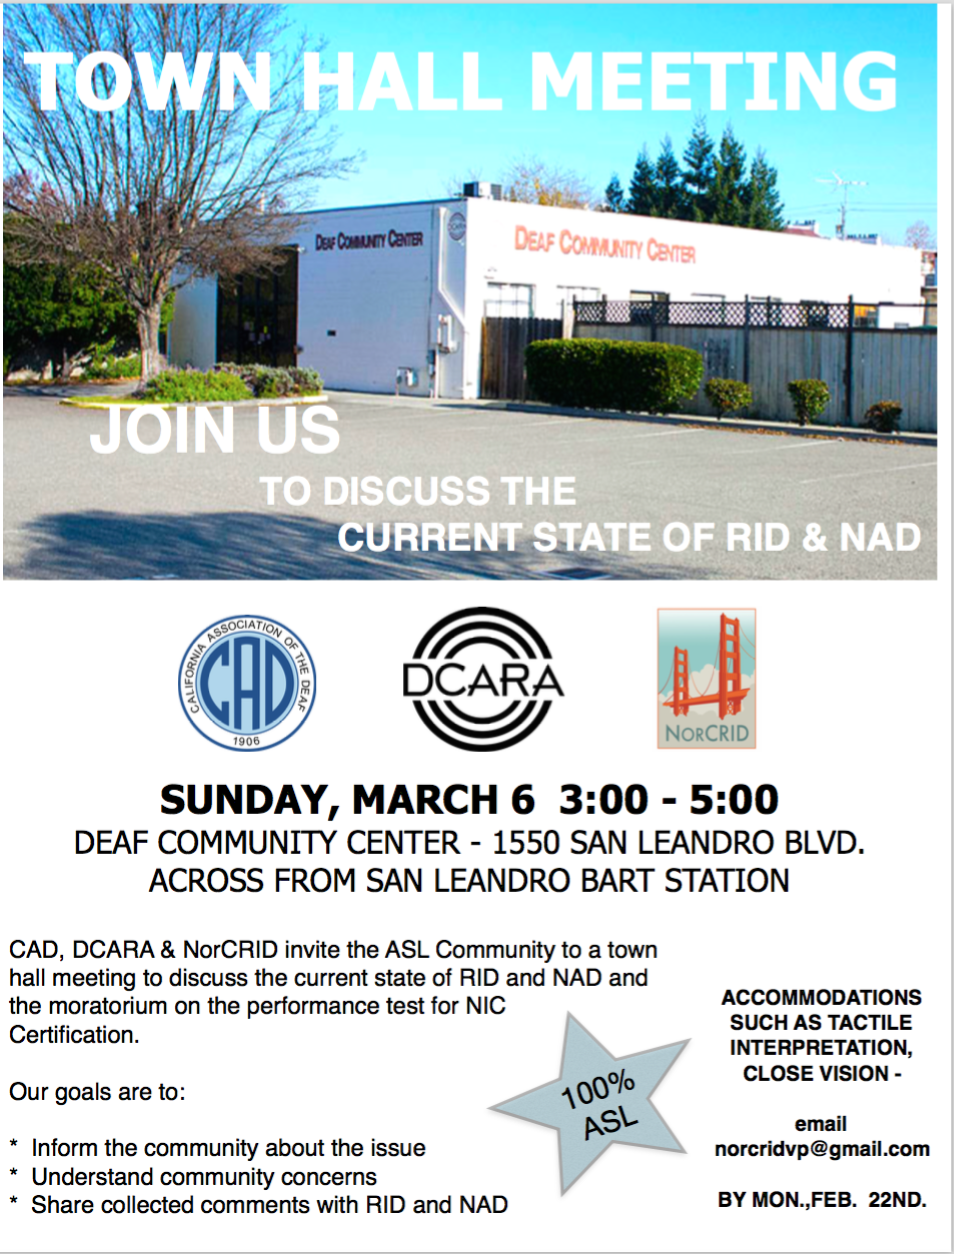 Town Hall Meeting Flyer- image of DCC, logos for NAD, DCARA and NorCRID. All text is also displayed below